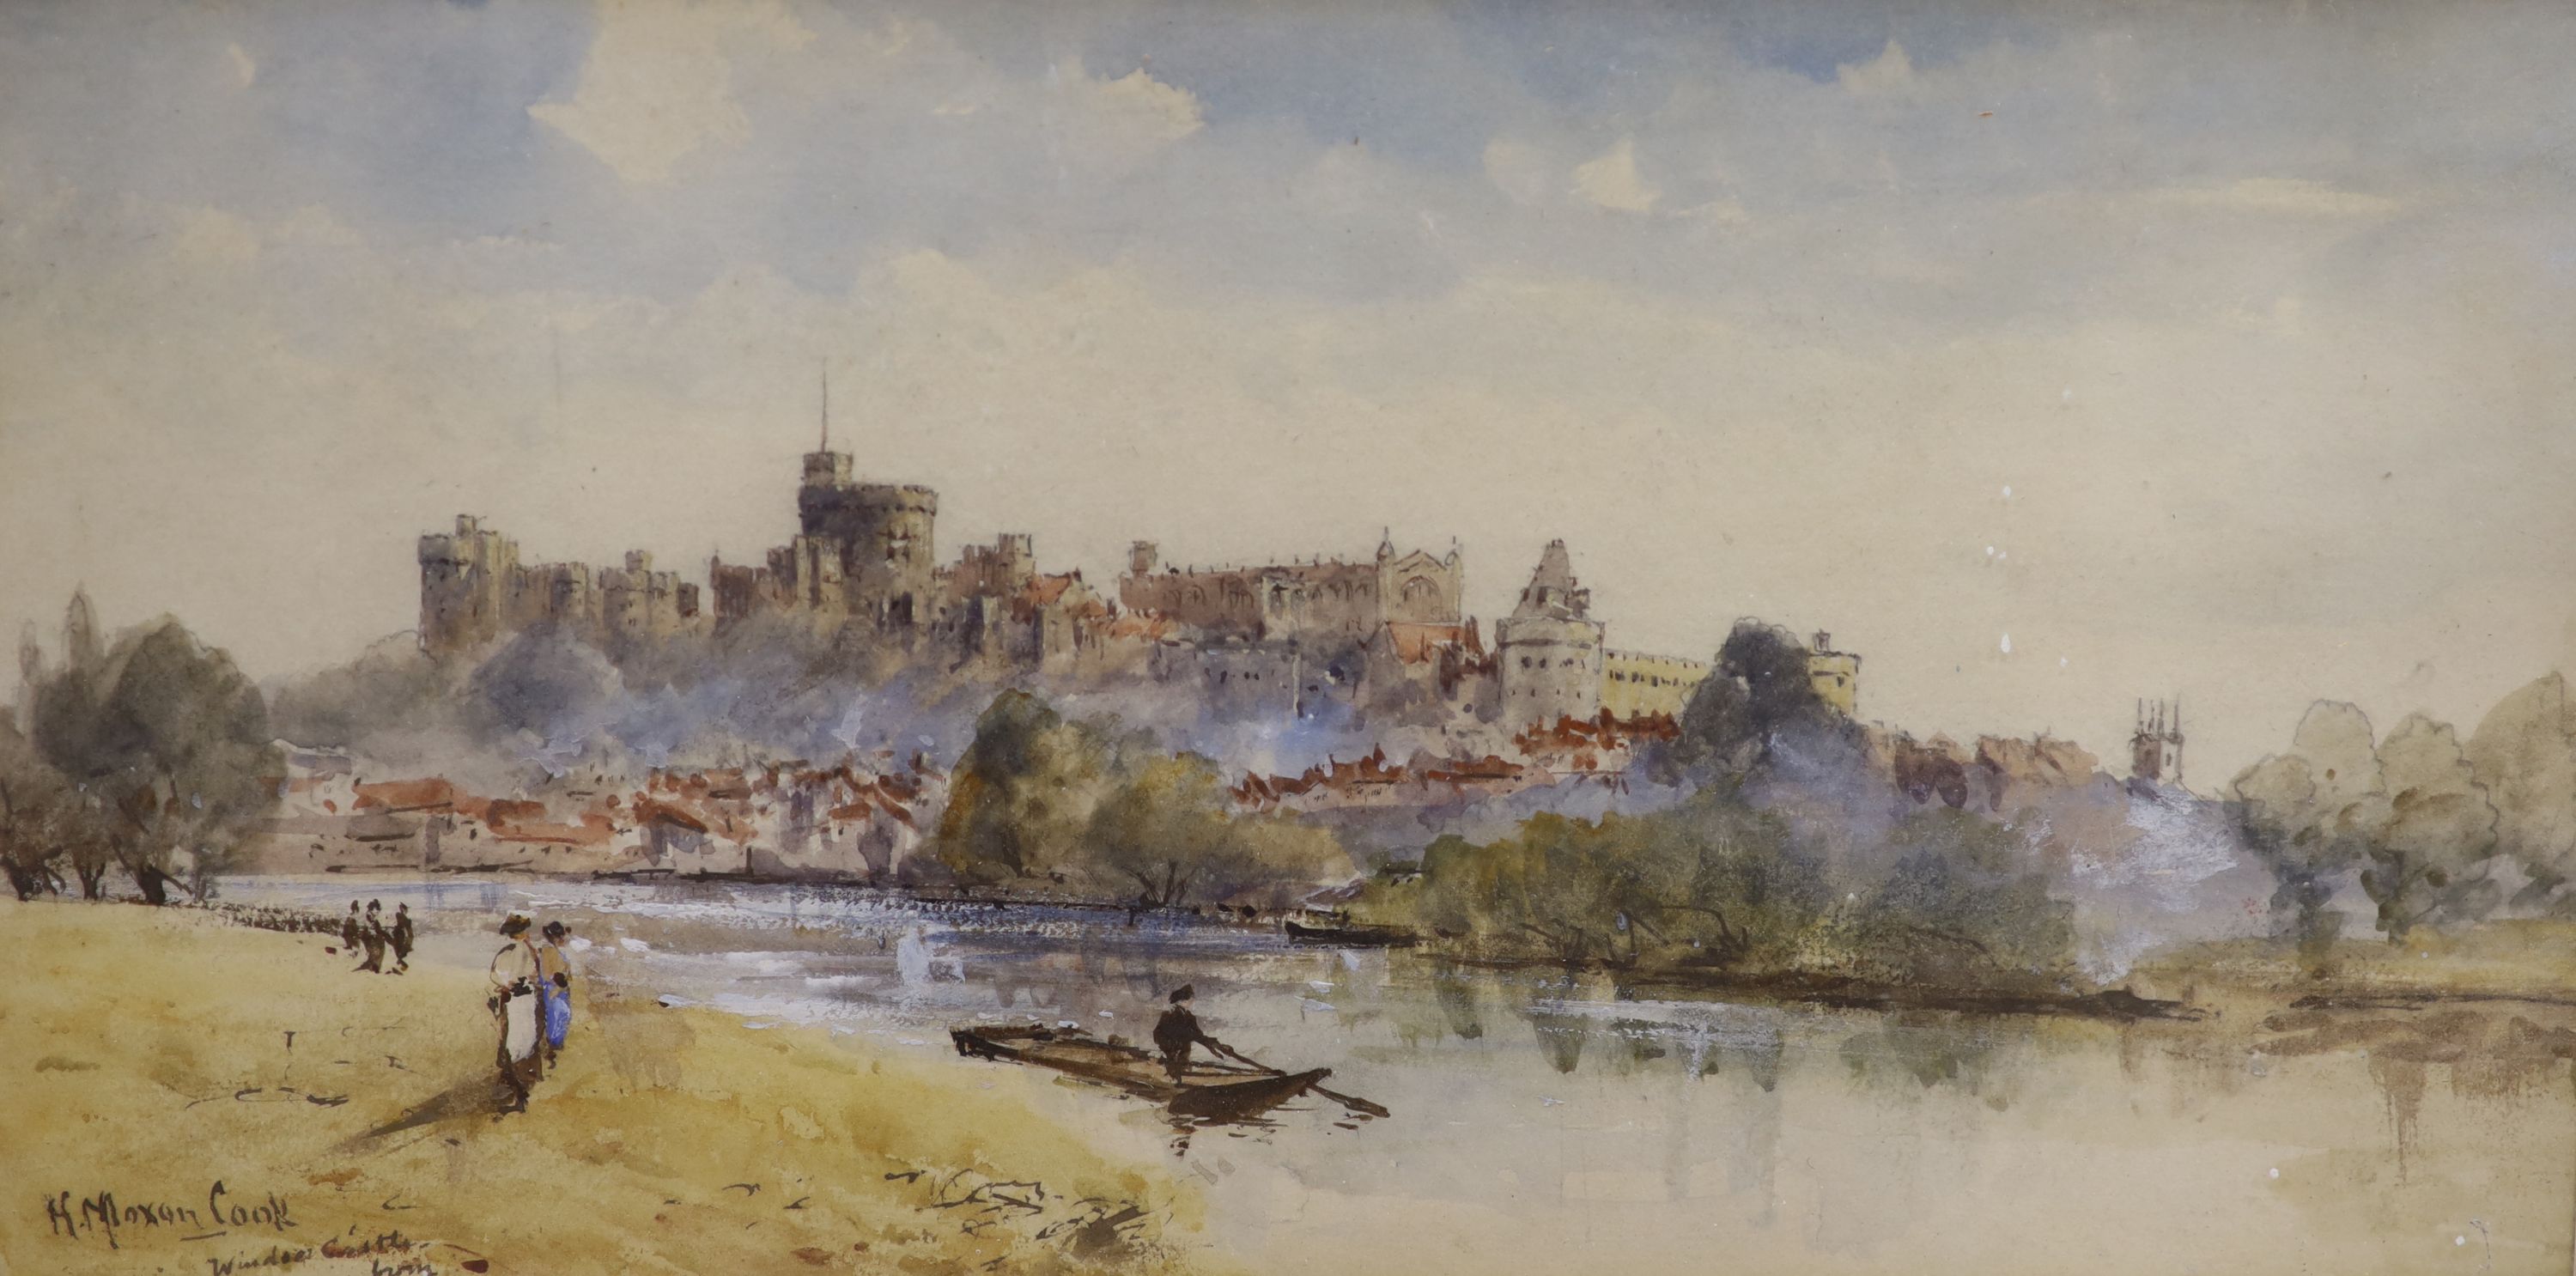 Herbert Moxon Cook (1844-1928), watercolour and ink, Windsor Castle from The Thames, signed, 17 x 33cm